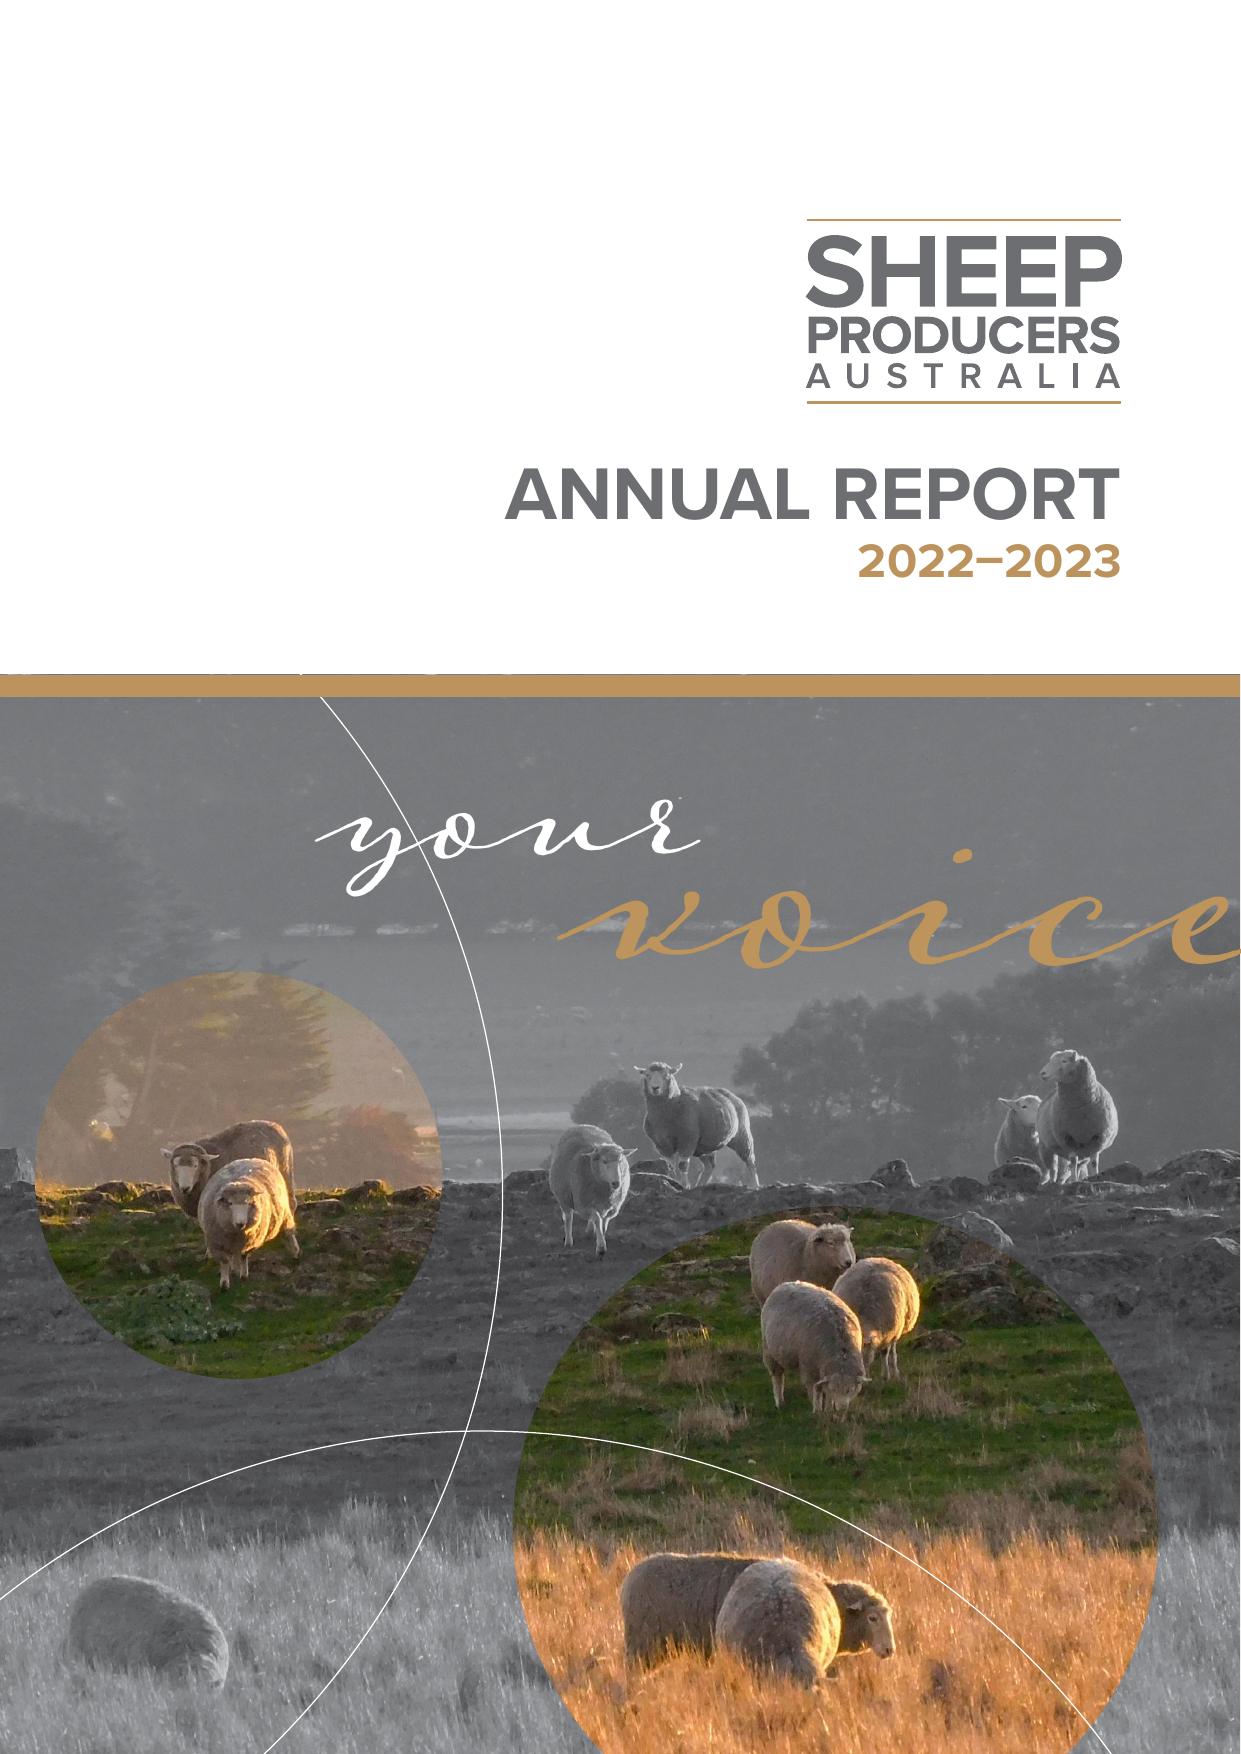 SHEEPPRODUCERS 2022 Annual Report